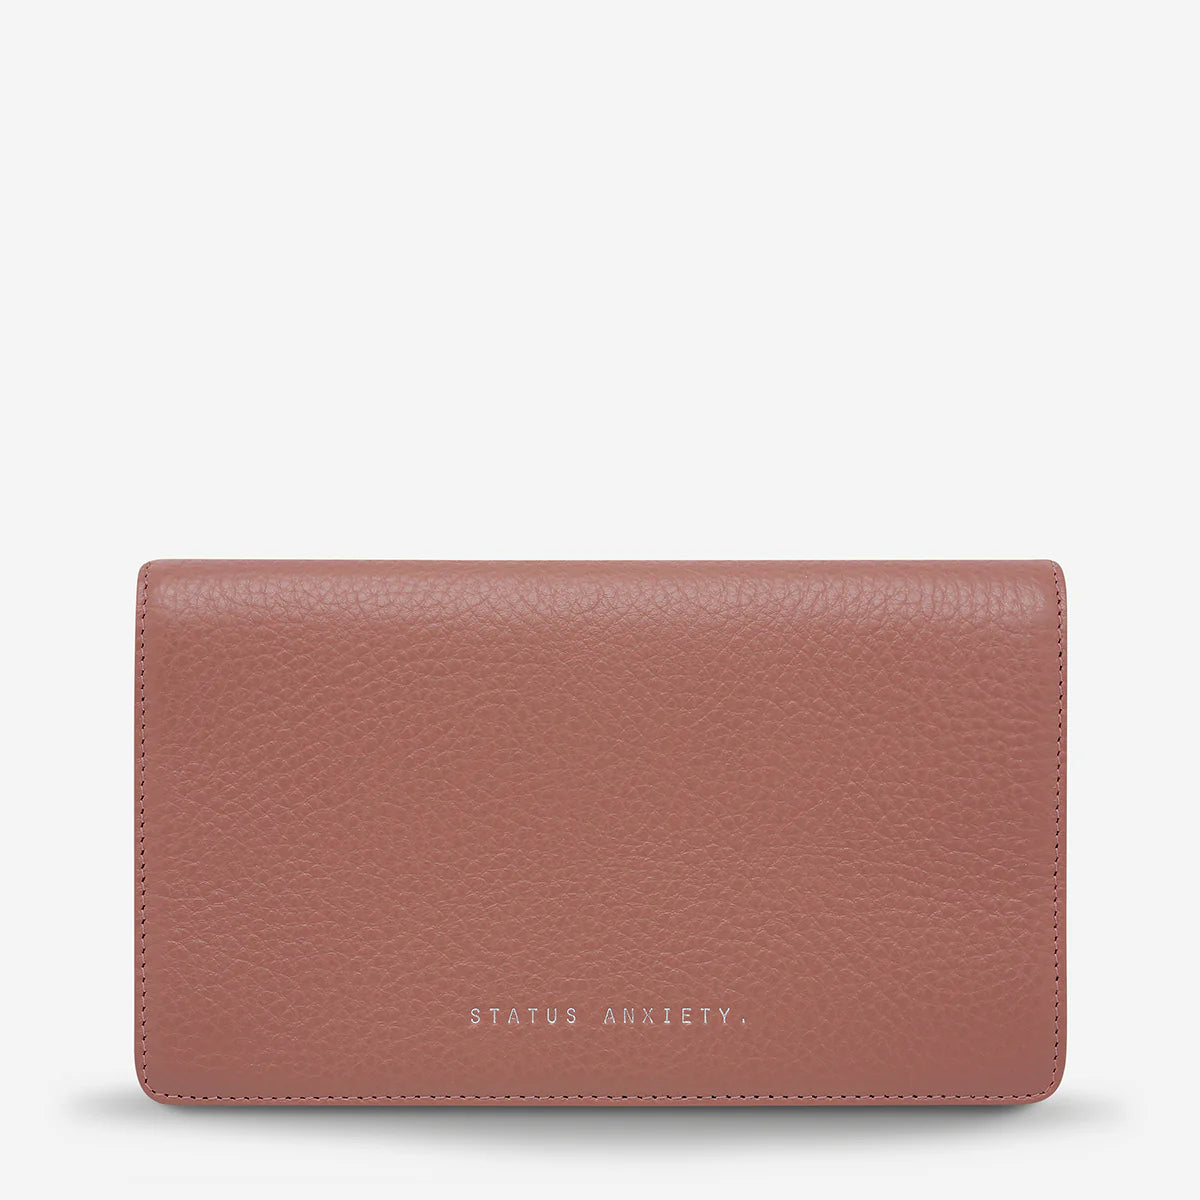 Status Anxiety Living Proof Wallet